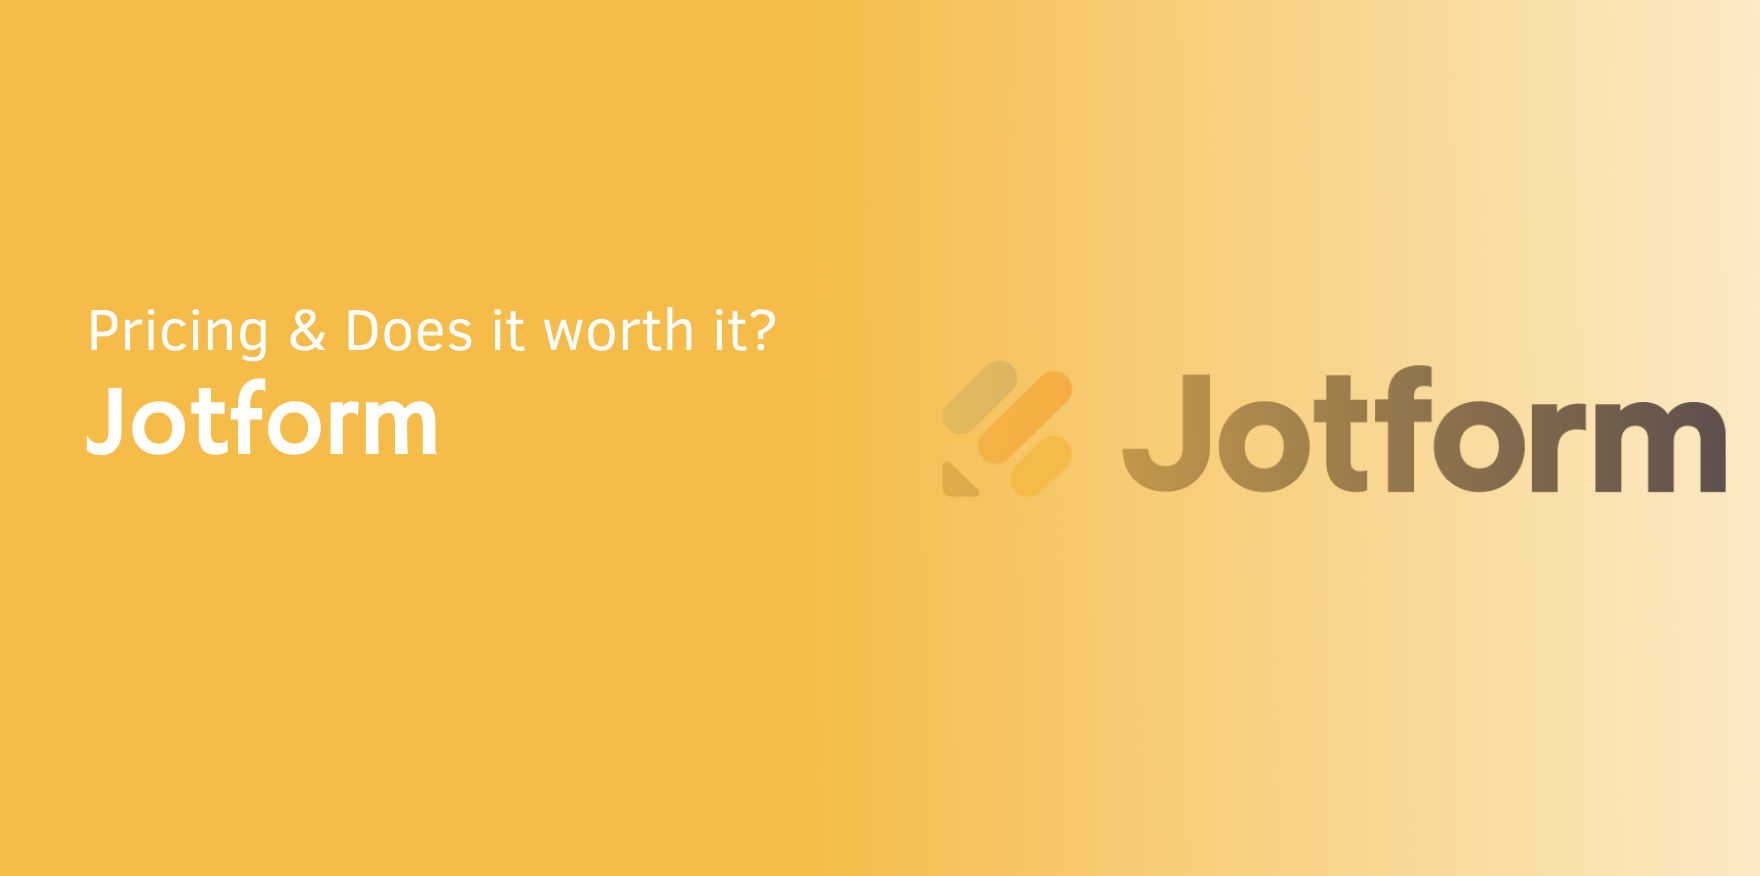 Jotform pricing & Does it worth it?